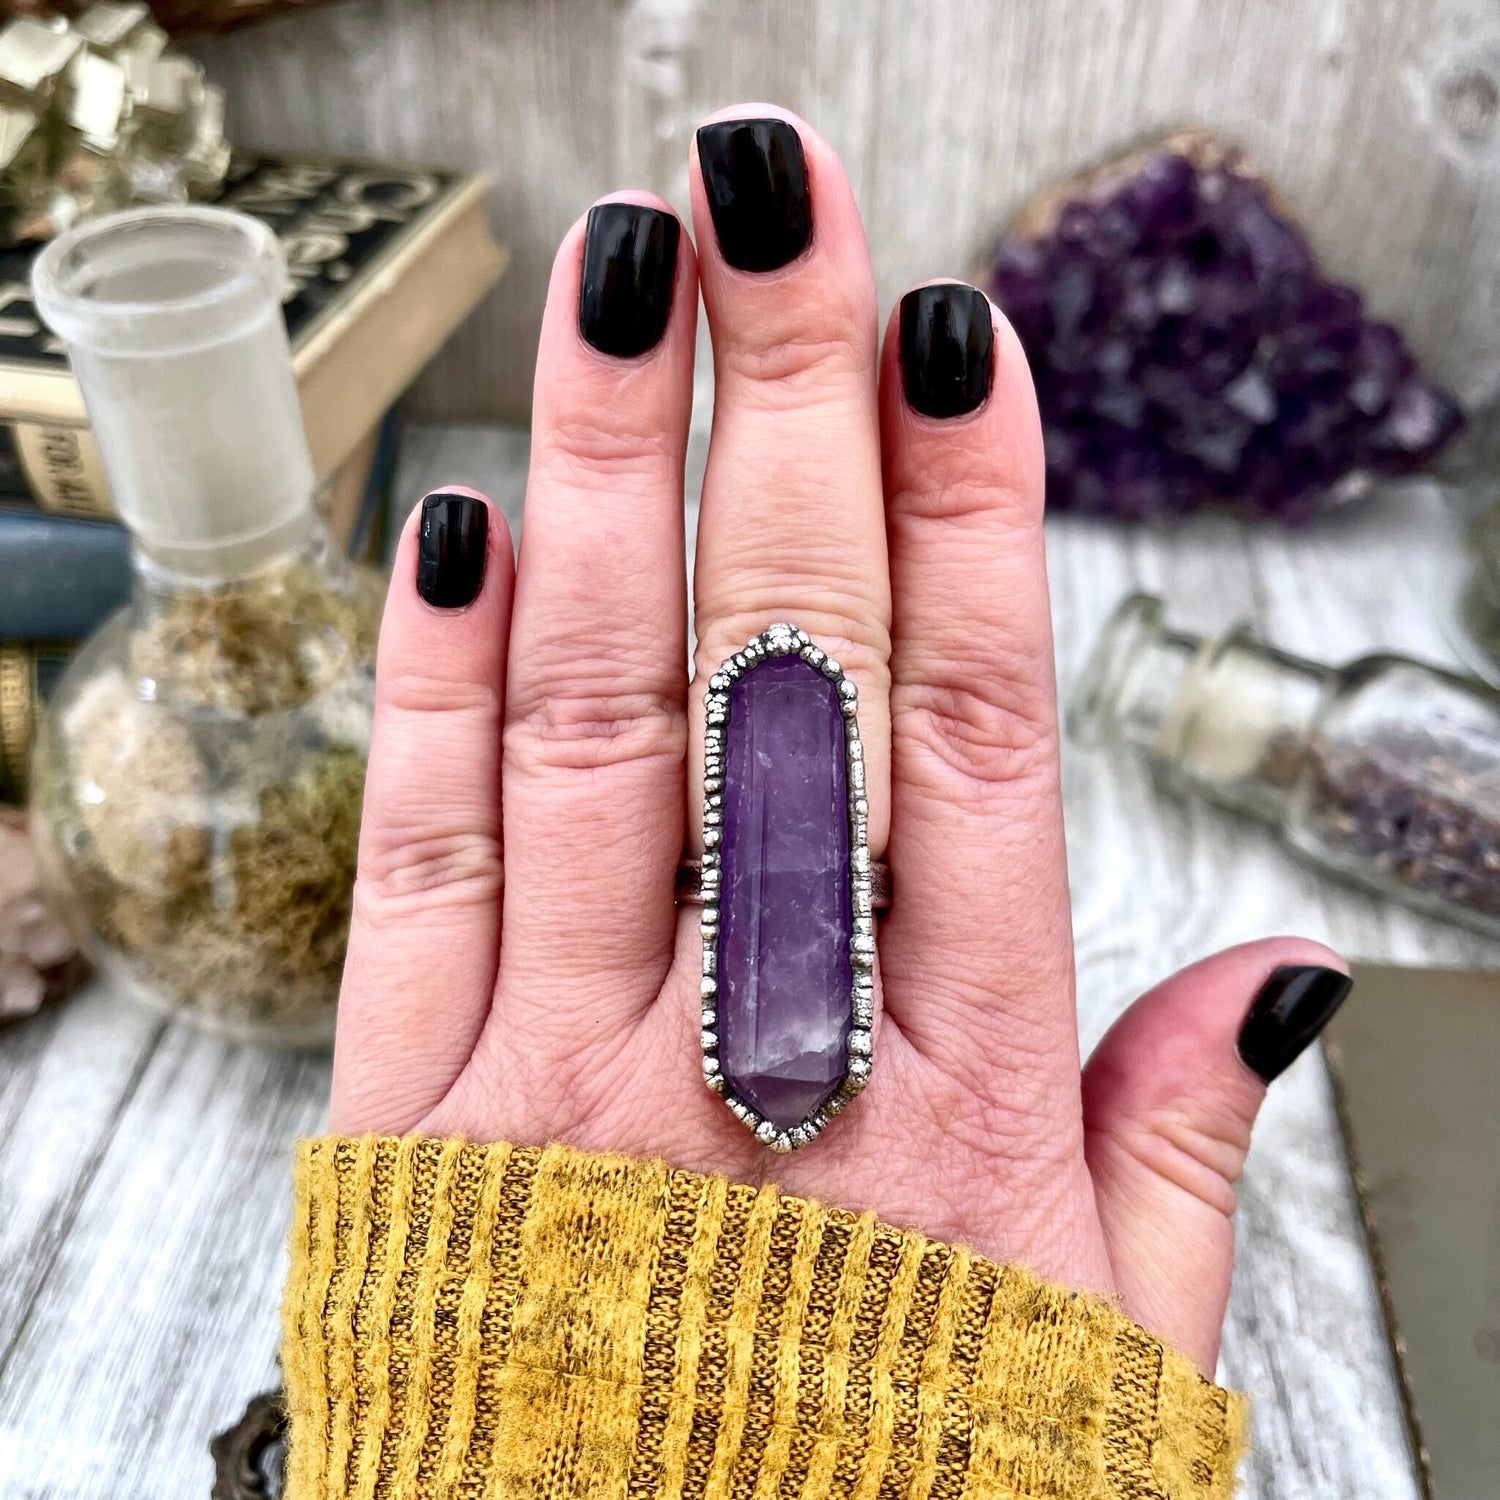 Purple Amethyst Crystal Point Ring Set in Fine Silver Size 8 - 9 / Foxlark Collection - One of a Kind